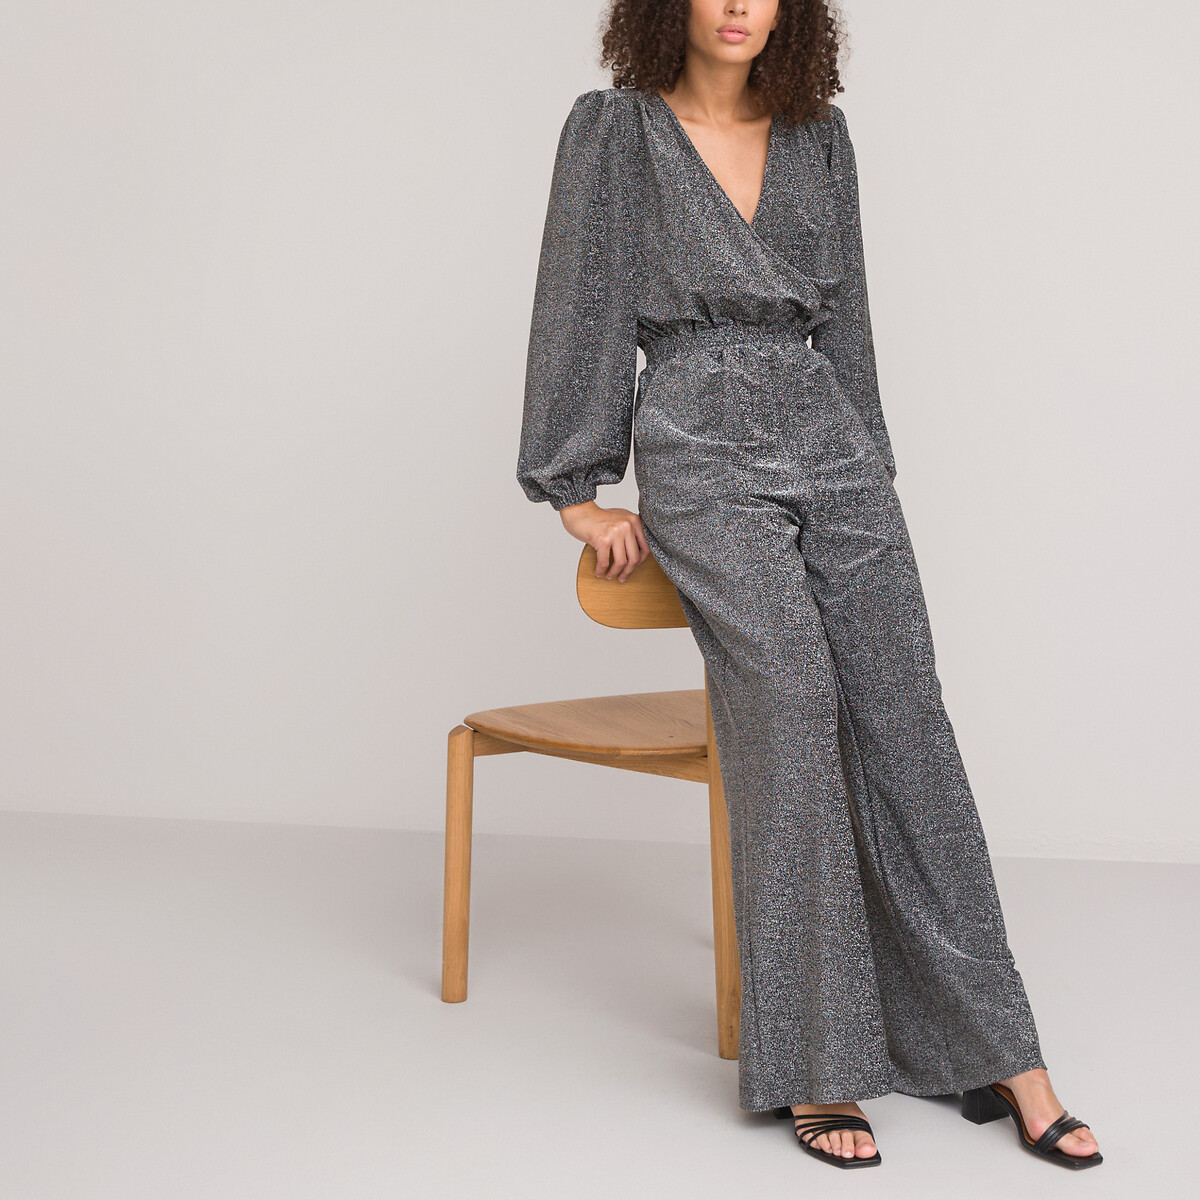 Recycled Glittery Jumpsuit with Puff Sleeves, Length  31.5